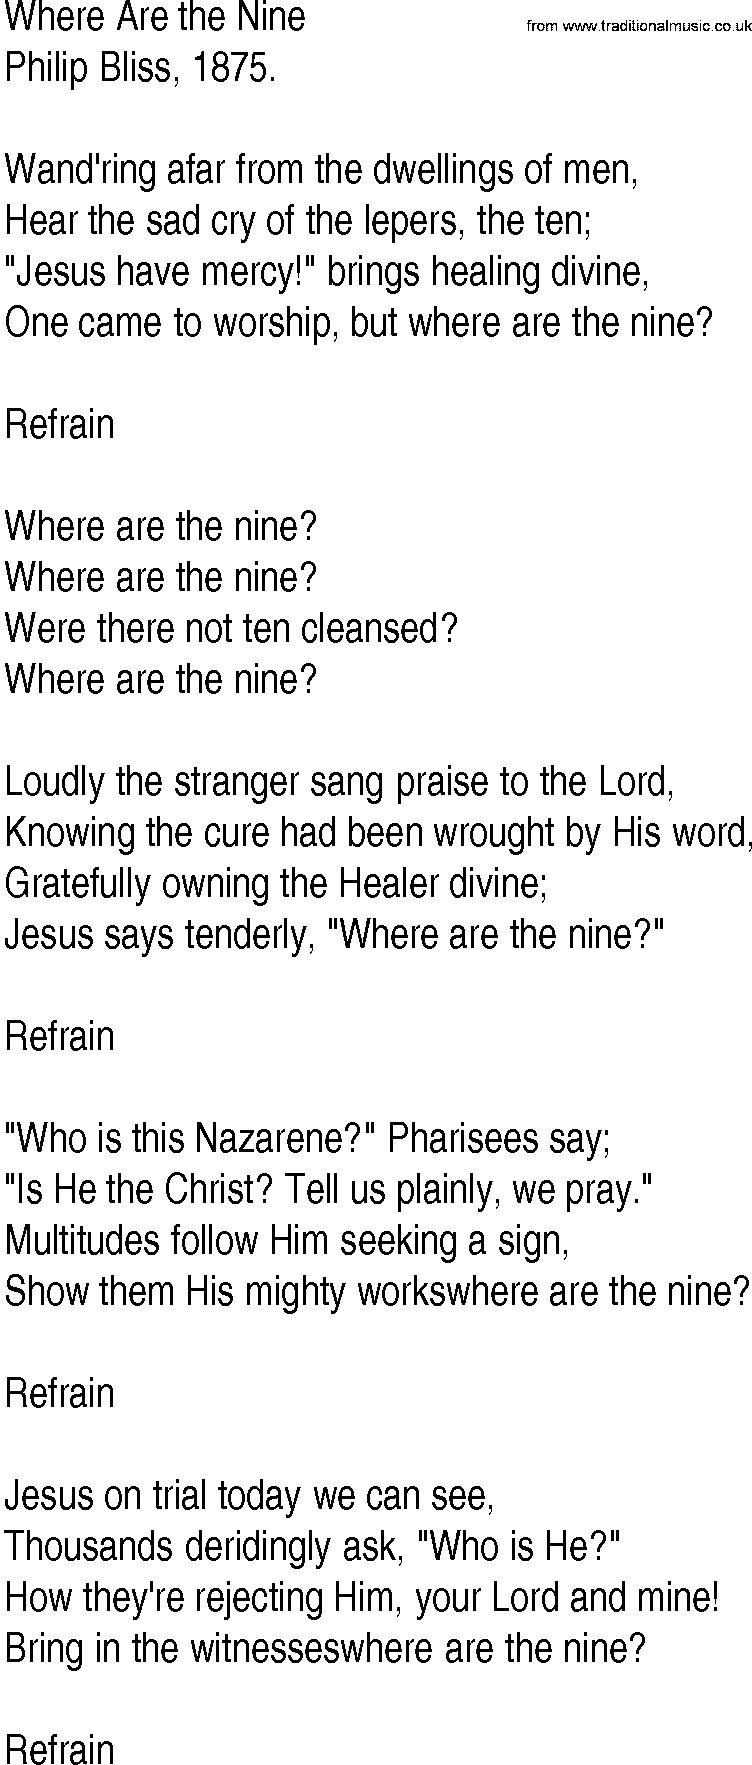 Hymn and Gospel Song: Where Are the Nine by Philip Bliss lyrics